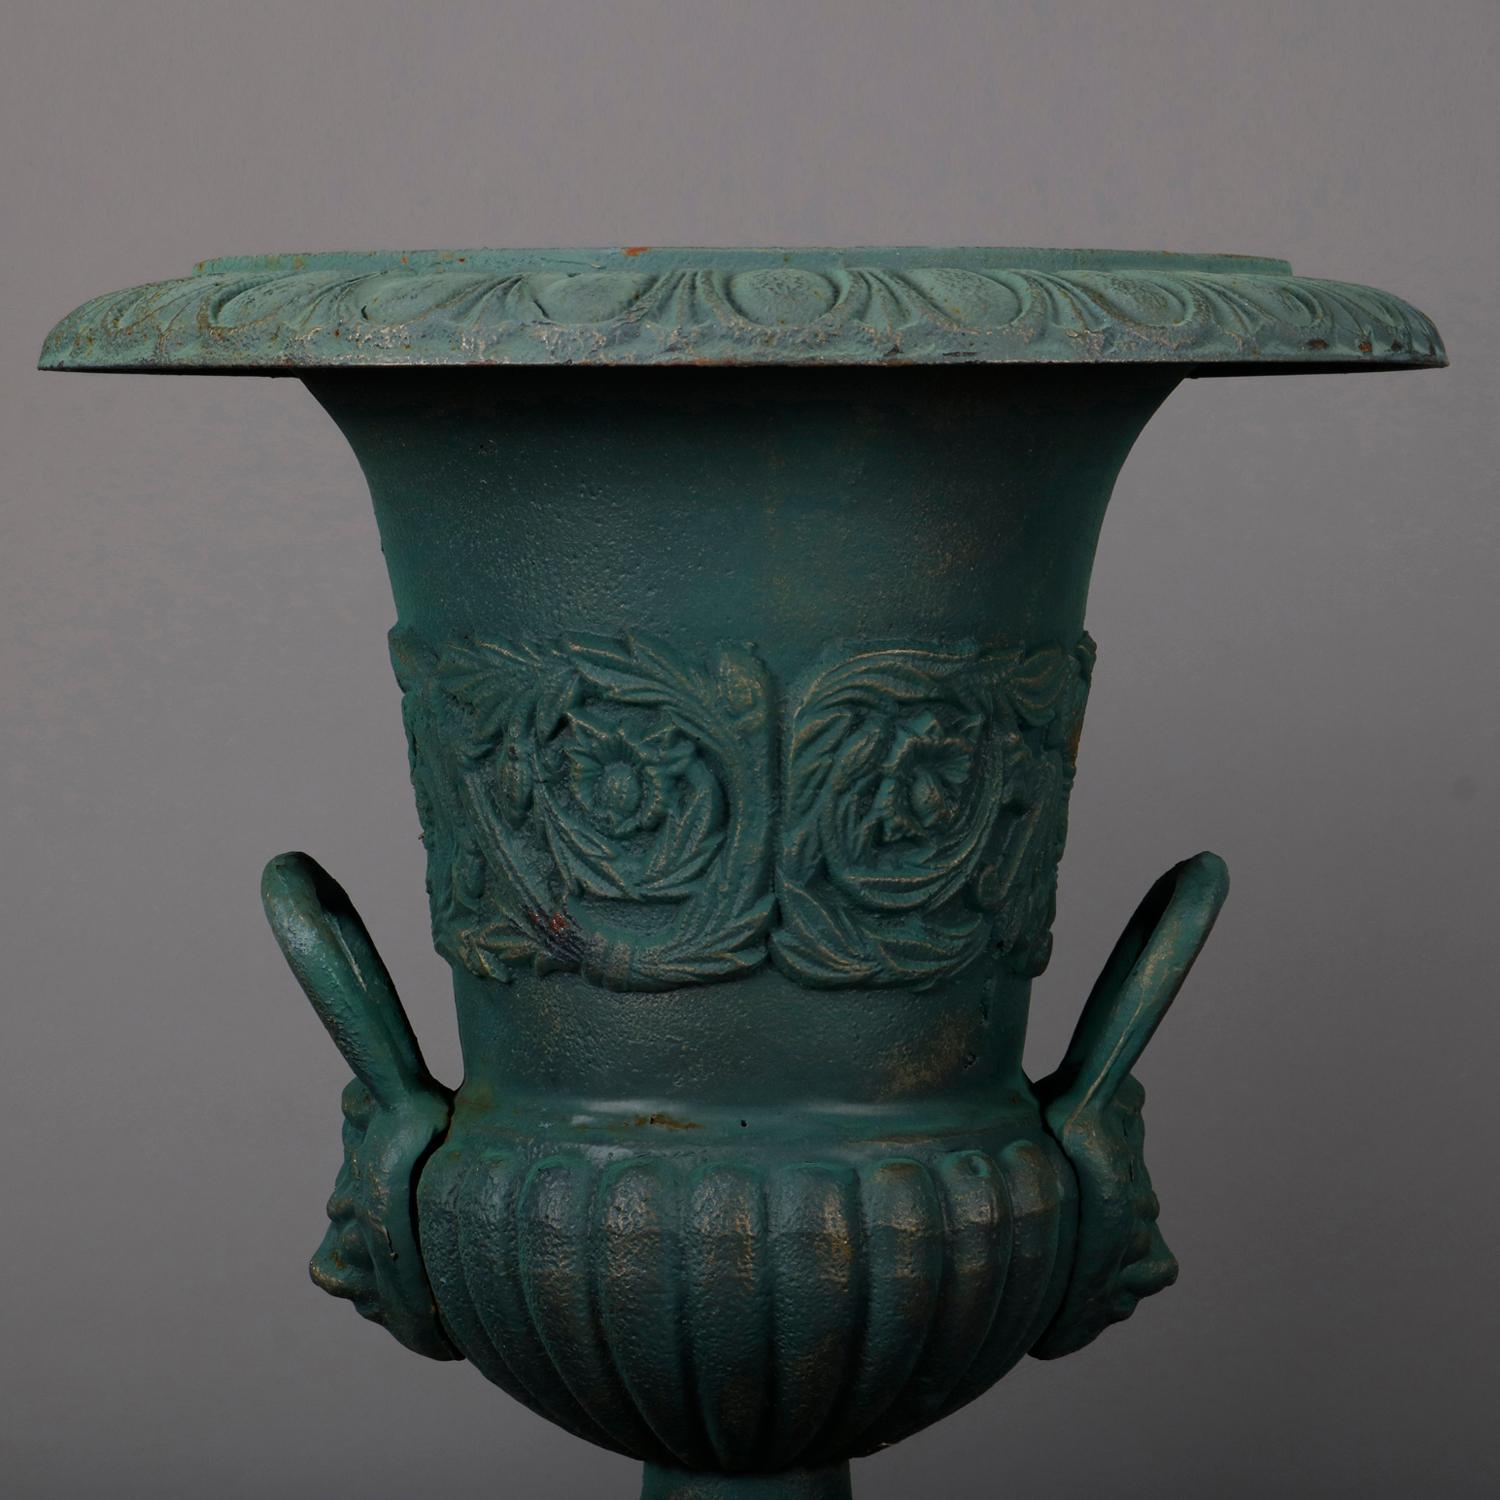 A pair of well cast French Classical garden planters feature iron construction in pedestal urn form having double handles, melon bowl bases and bands of high relief foliate decoration, painted green, seated on flared plinths having reserves with